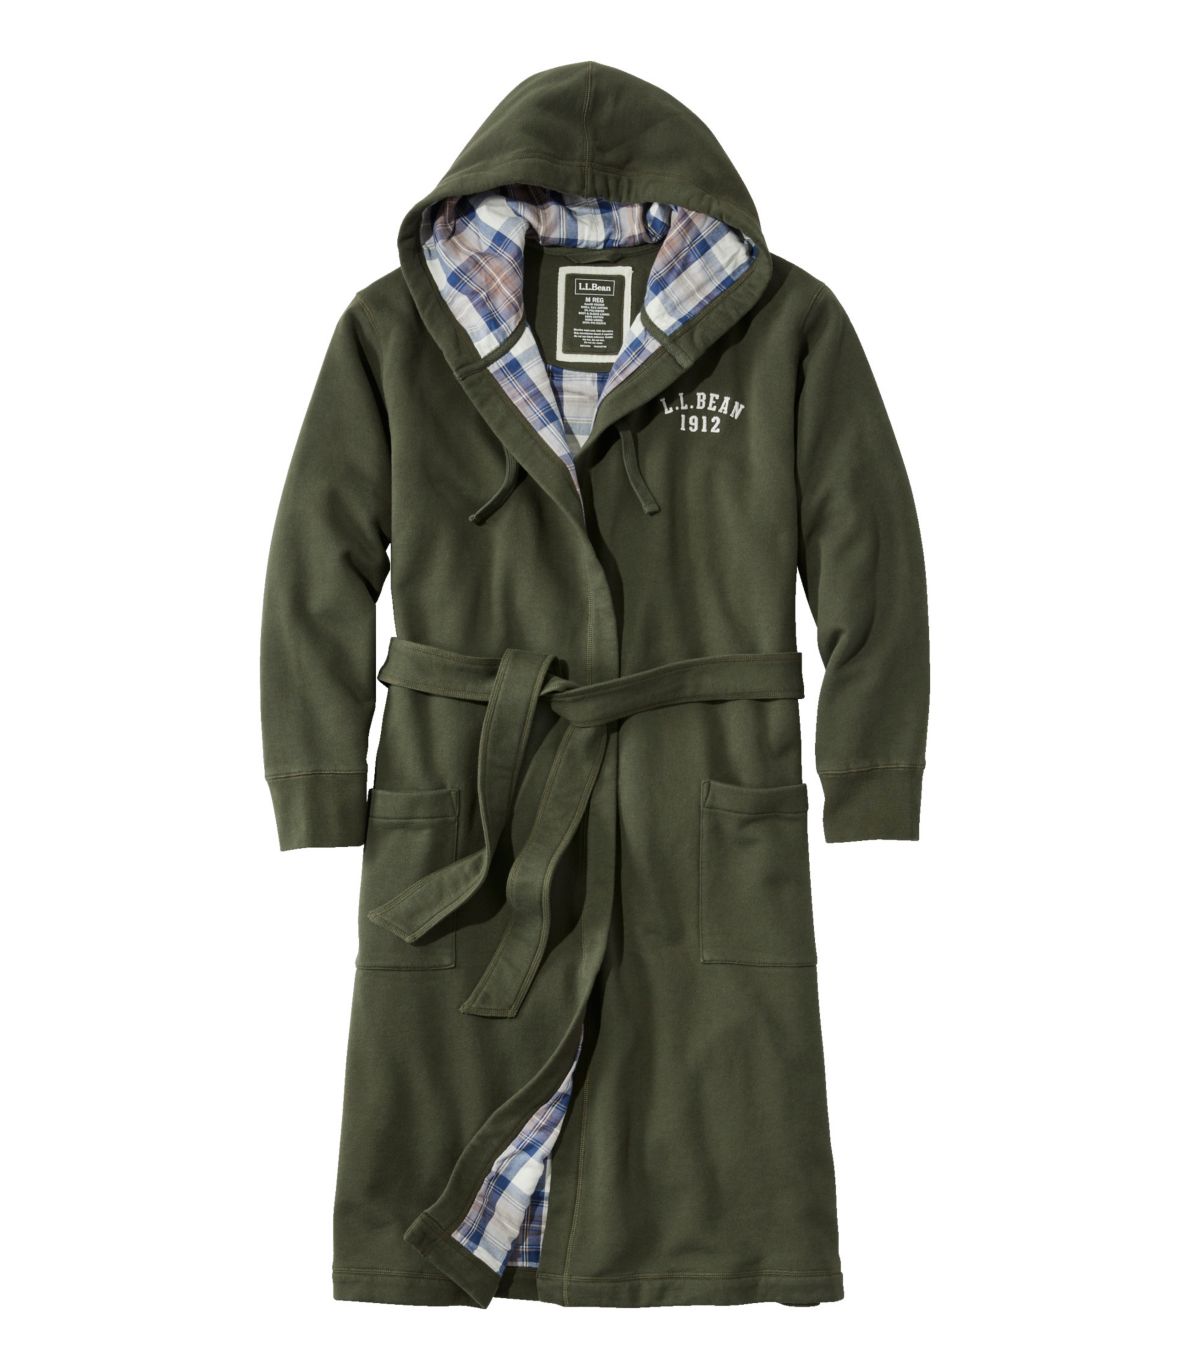 Men's Rugby Robe, Flannel-Lined, Hooded